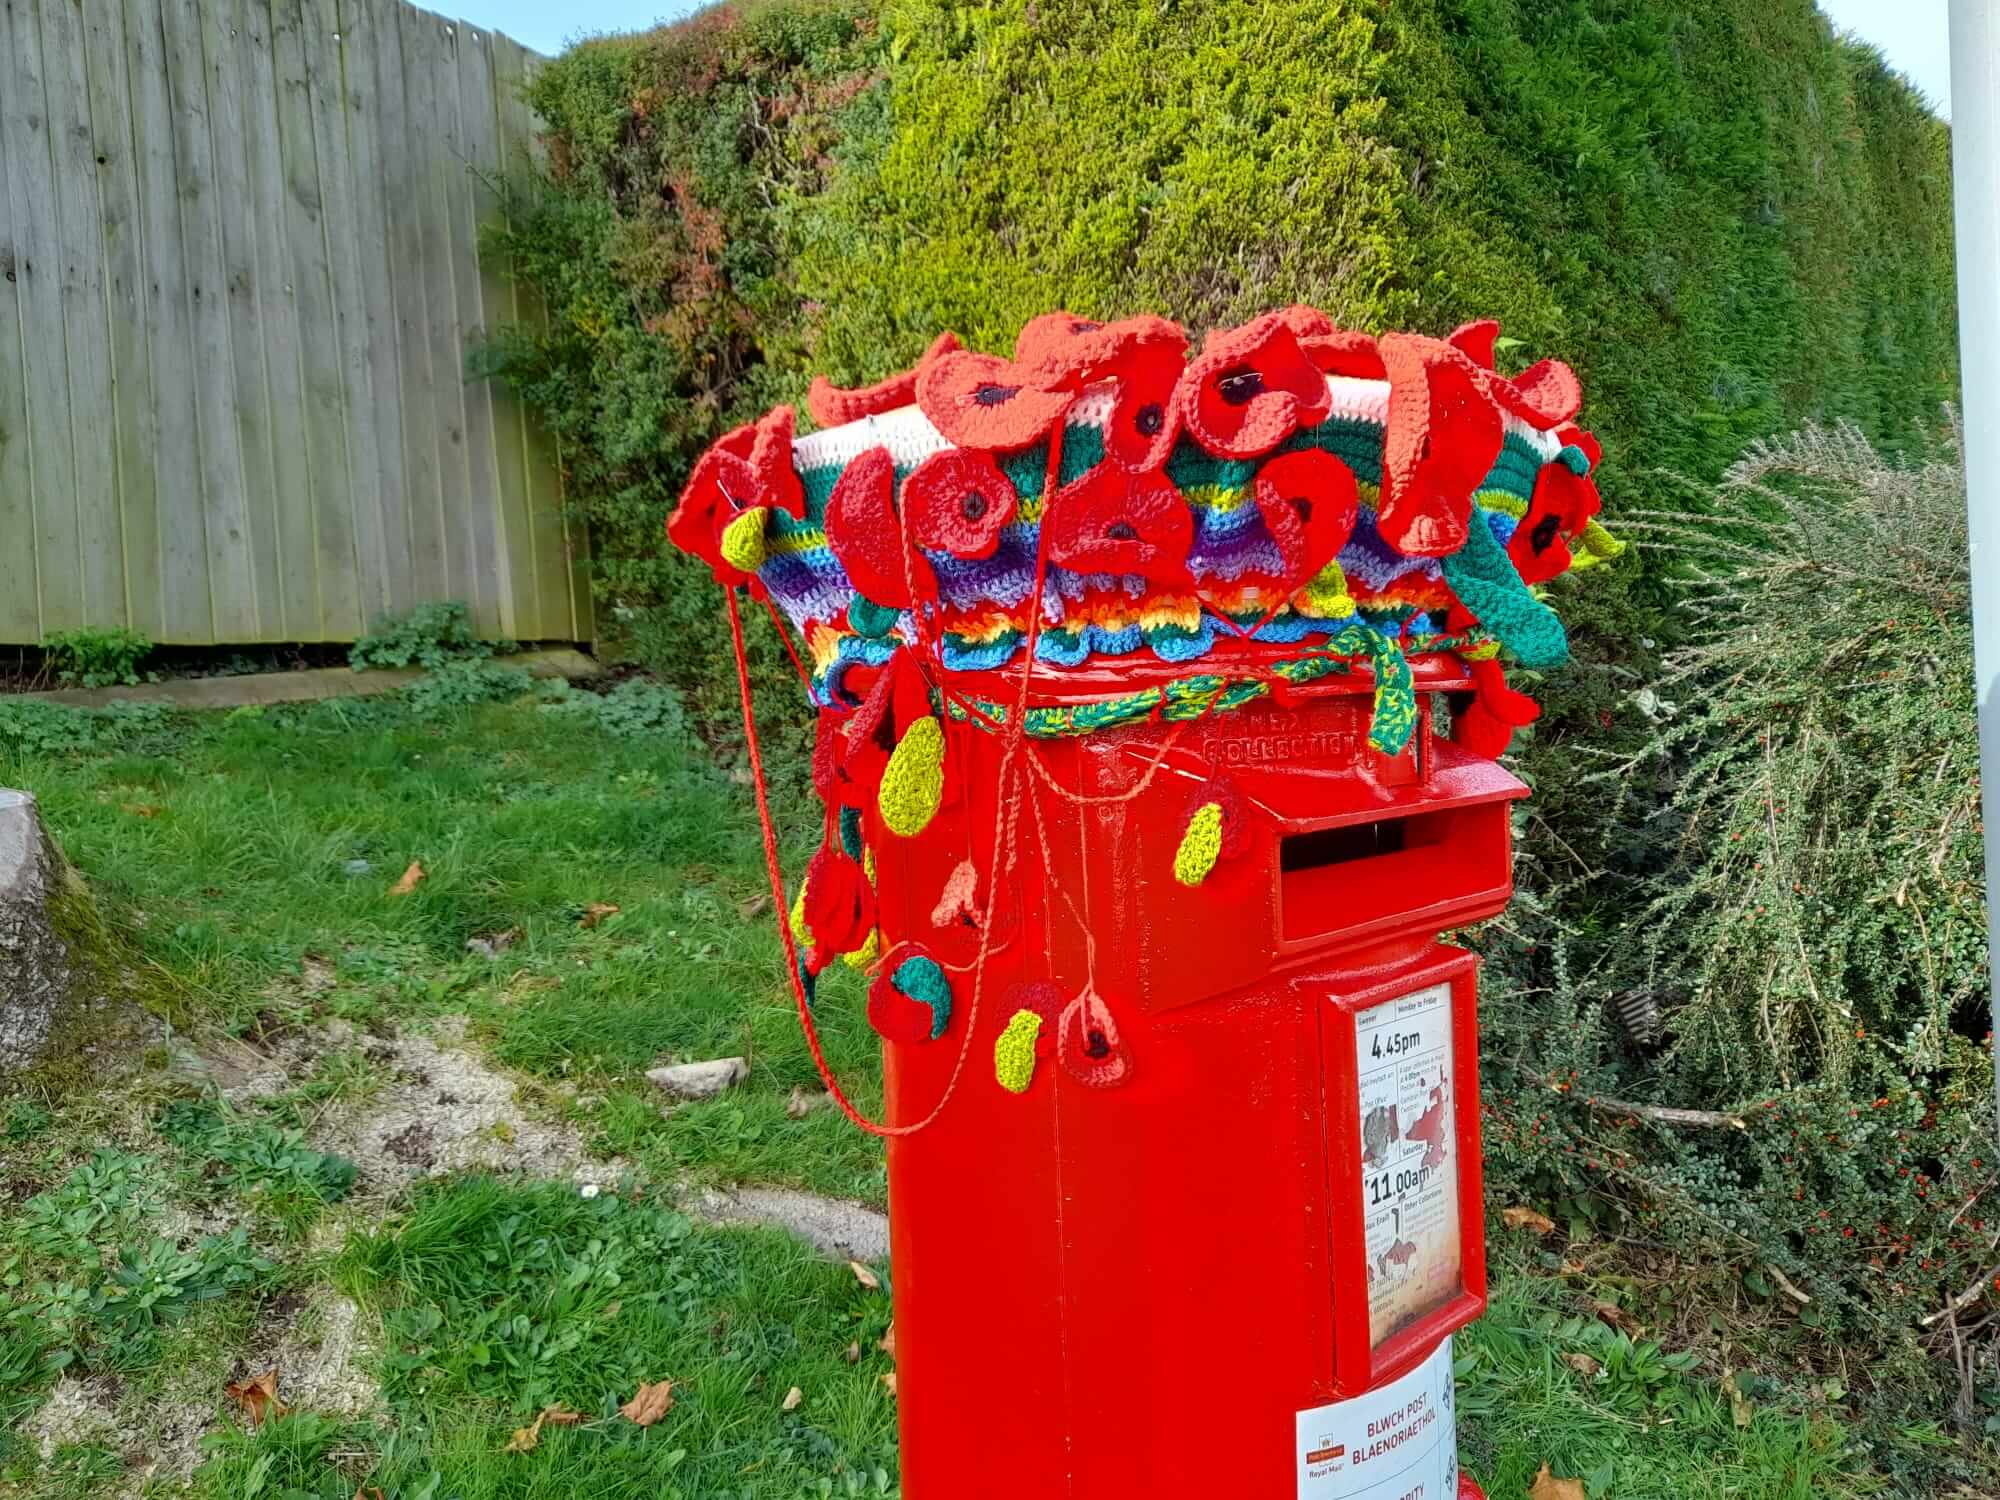 Postbox topped with knitted poppies